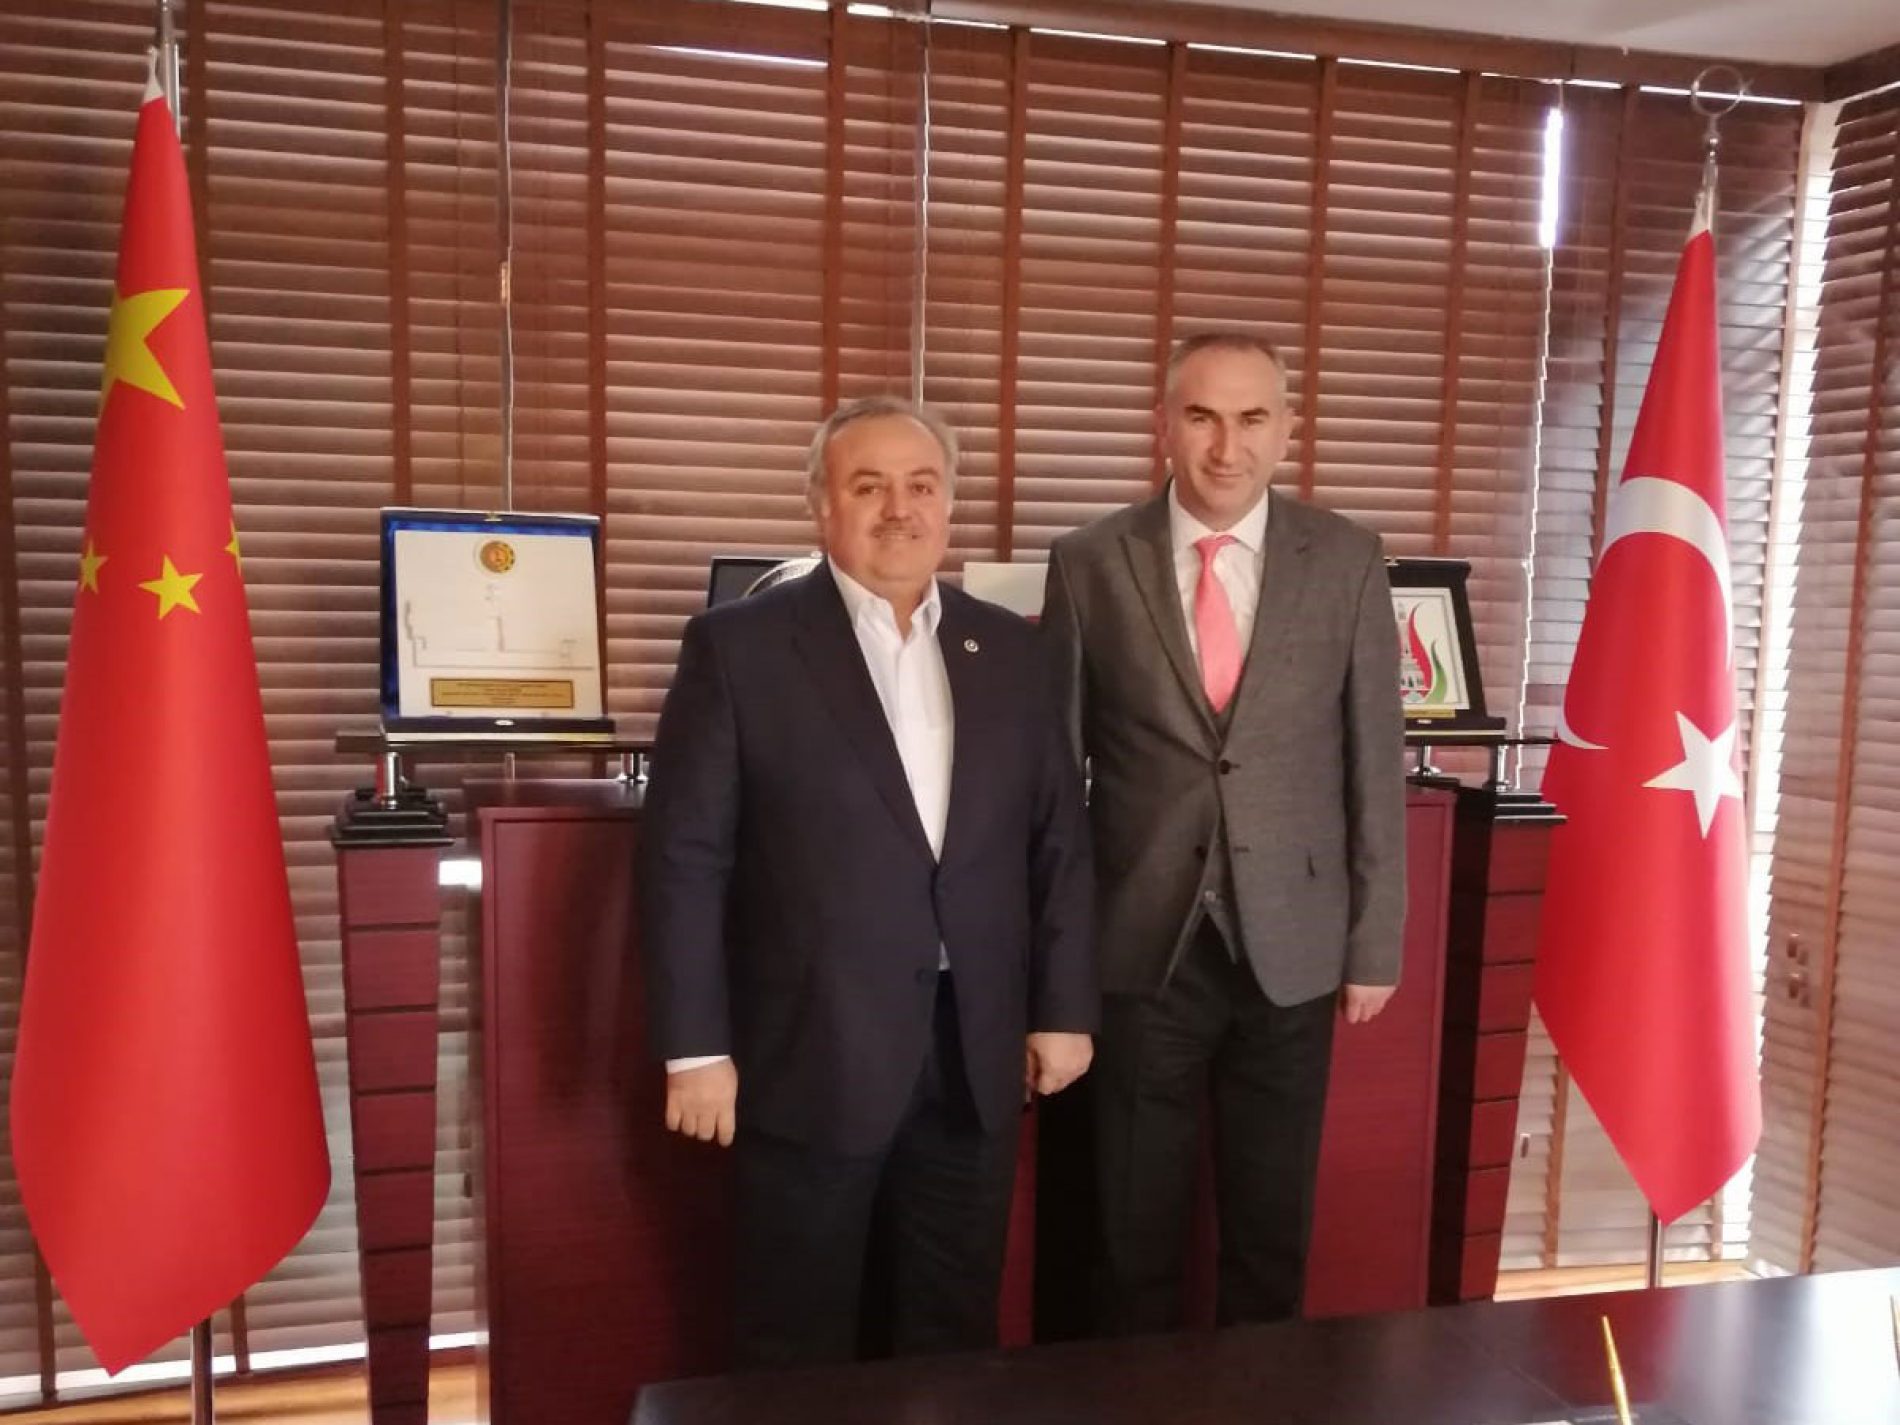 TBMM (Grand National Assembly of Turkey) Medical Aromatic Plants Marketing and Research Commission Vice Chairman AK Party Karaman Deputy Dr. Recep ŞEKER and businessmen from Karaman visited our Association President